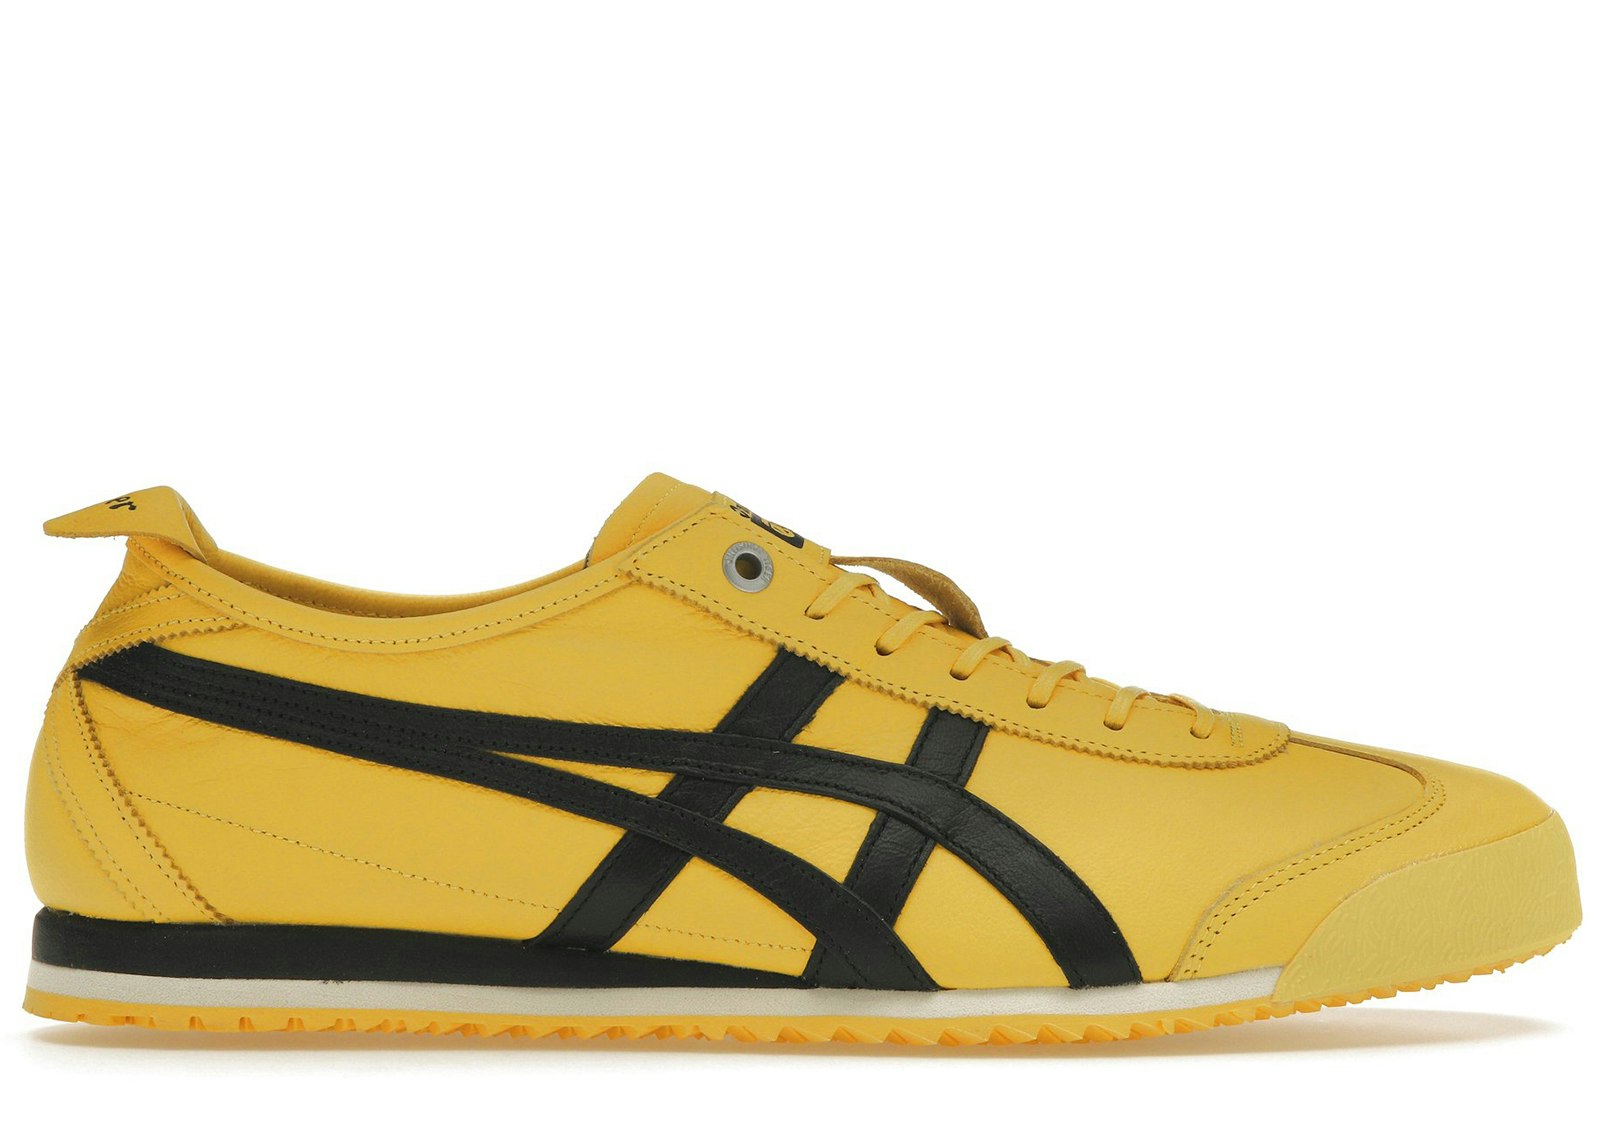 Bruce Lee Black and Yellow Onitsuka Tiger Colorado 85 - Legend Ltd to ONLY  100! | eBay